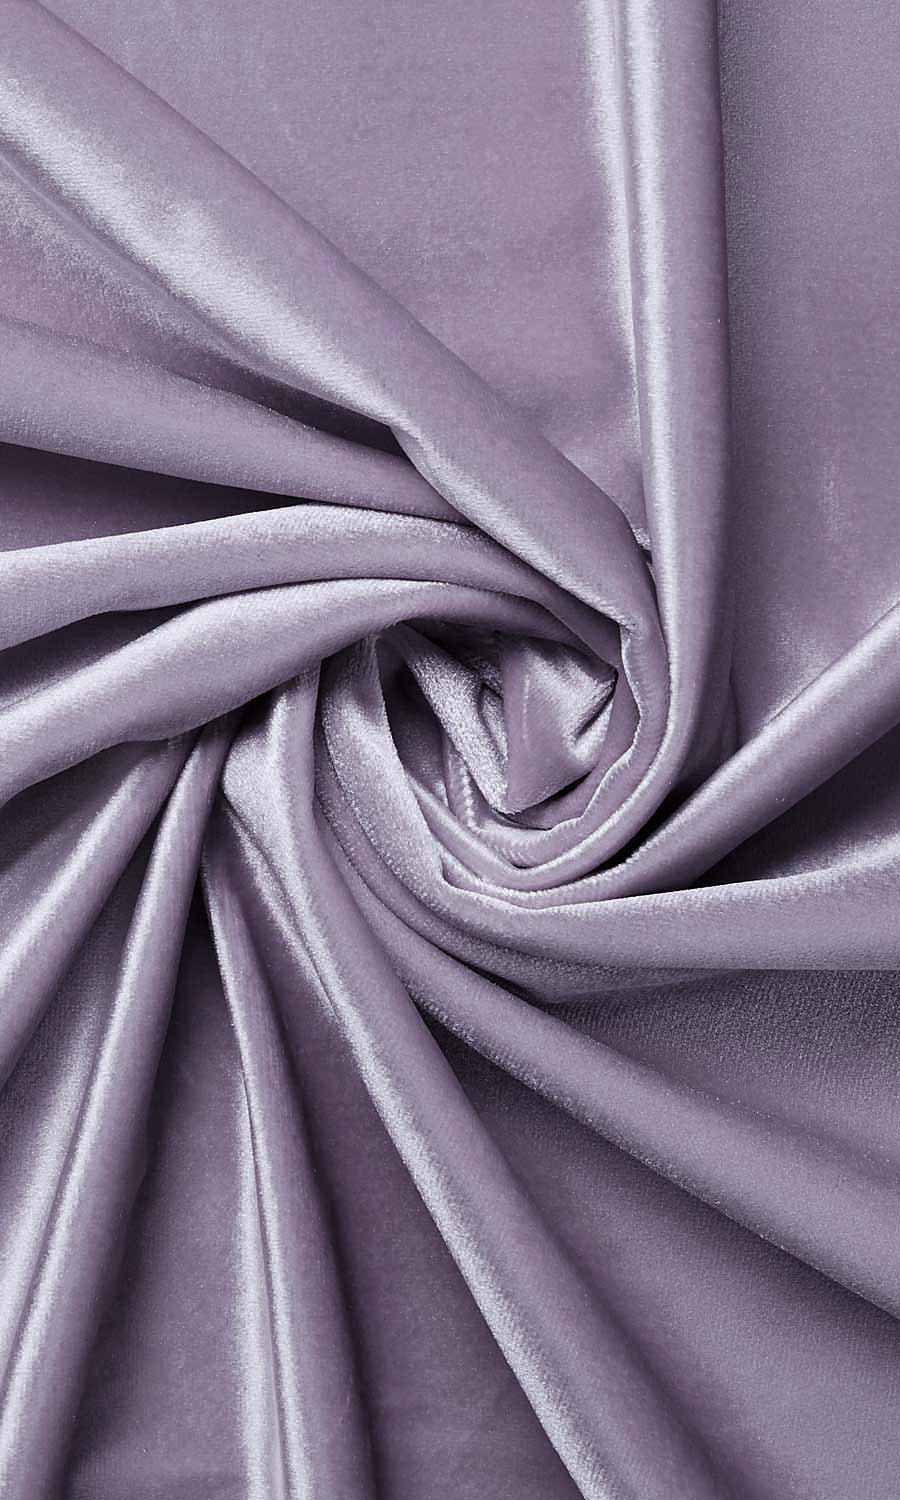 Dusty Violet' Fabric by the Yard (Mauve/ Purple)